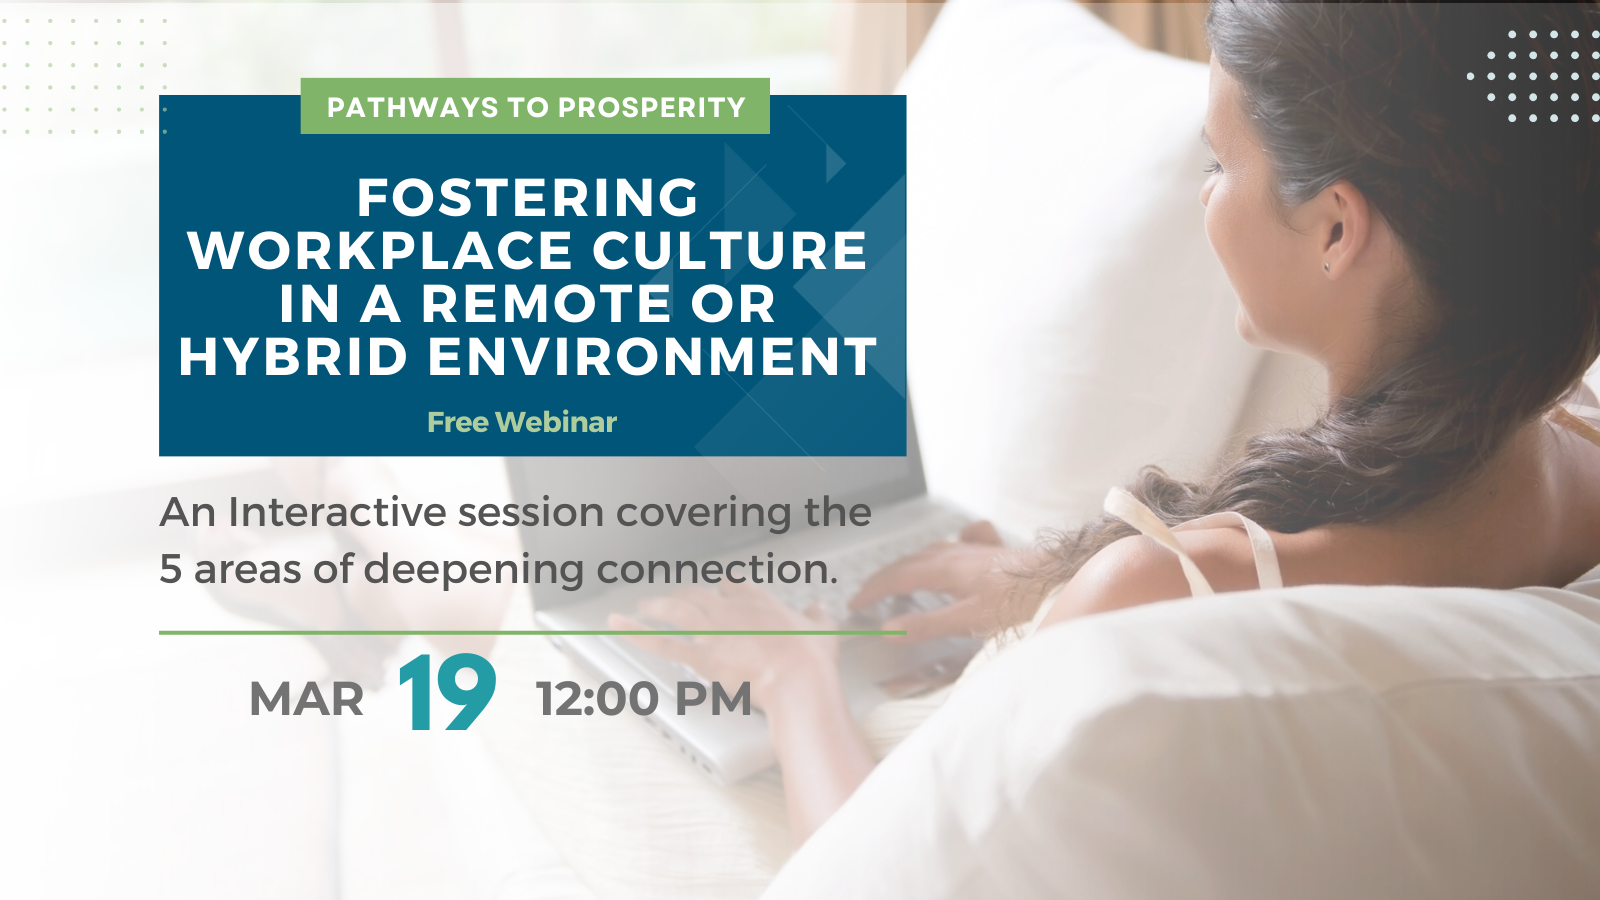 Fostering Workplace Culture in a Remote or Hybrid Environment Webinar